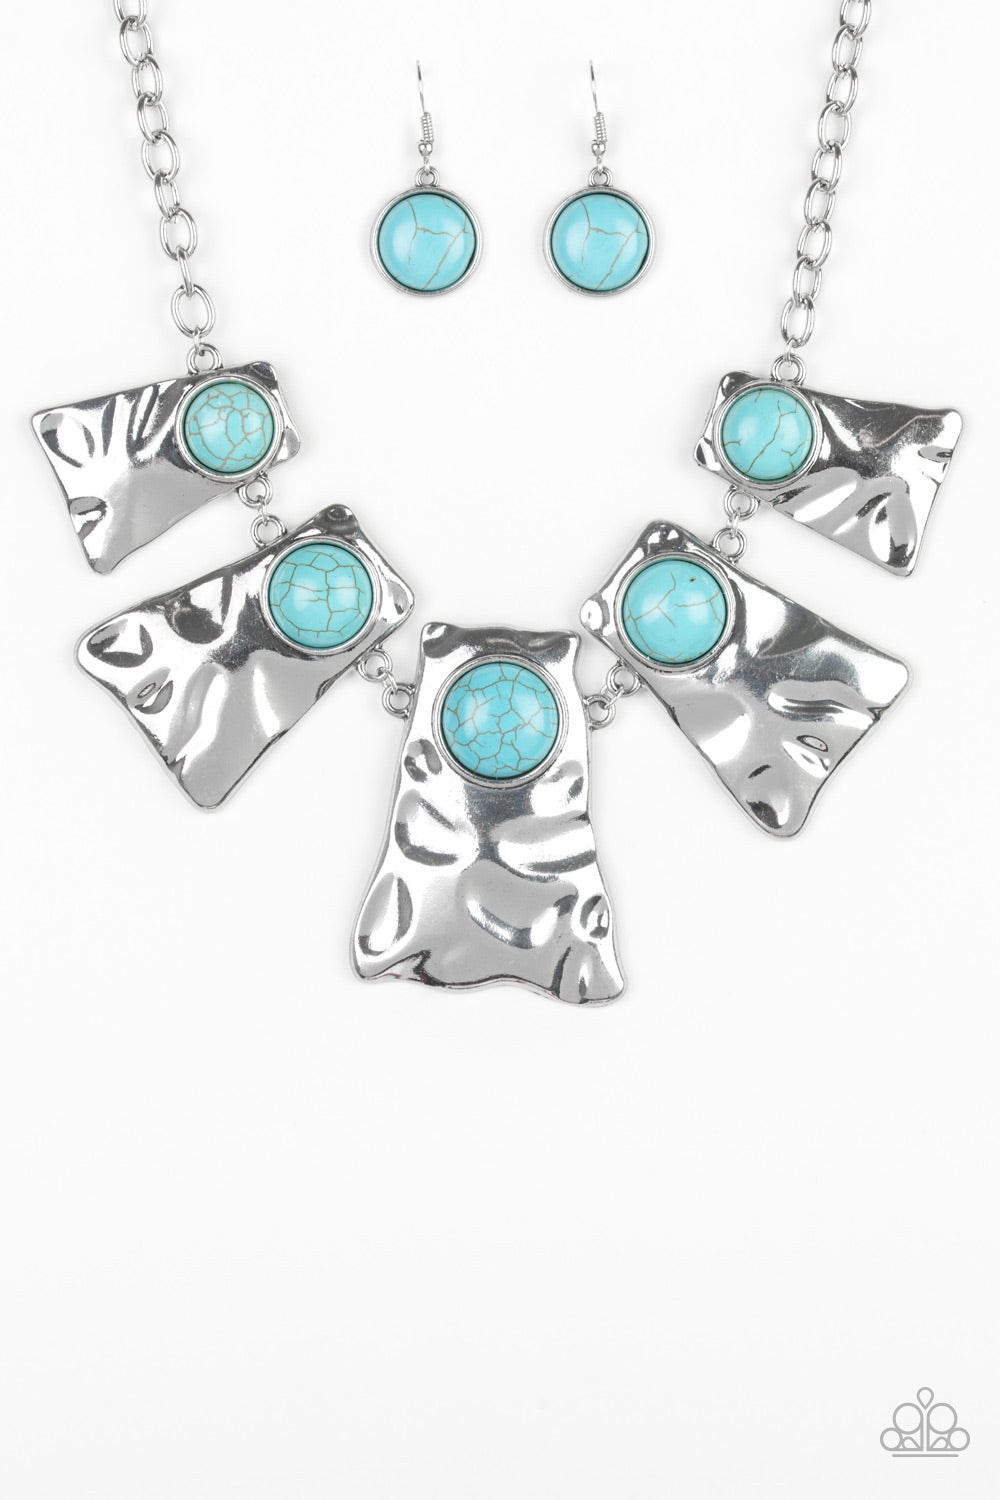 Cougar - Blue Turquoise Necklace